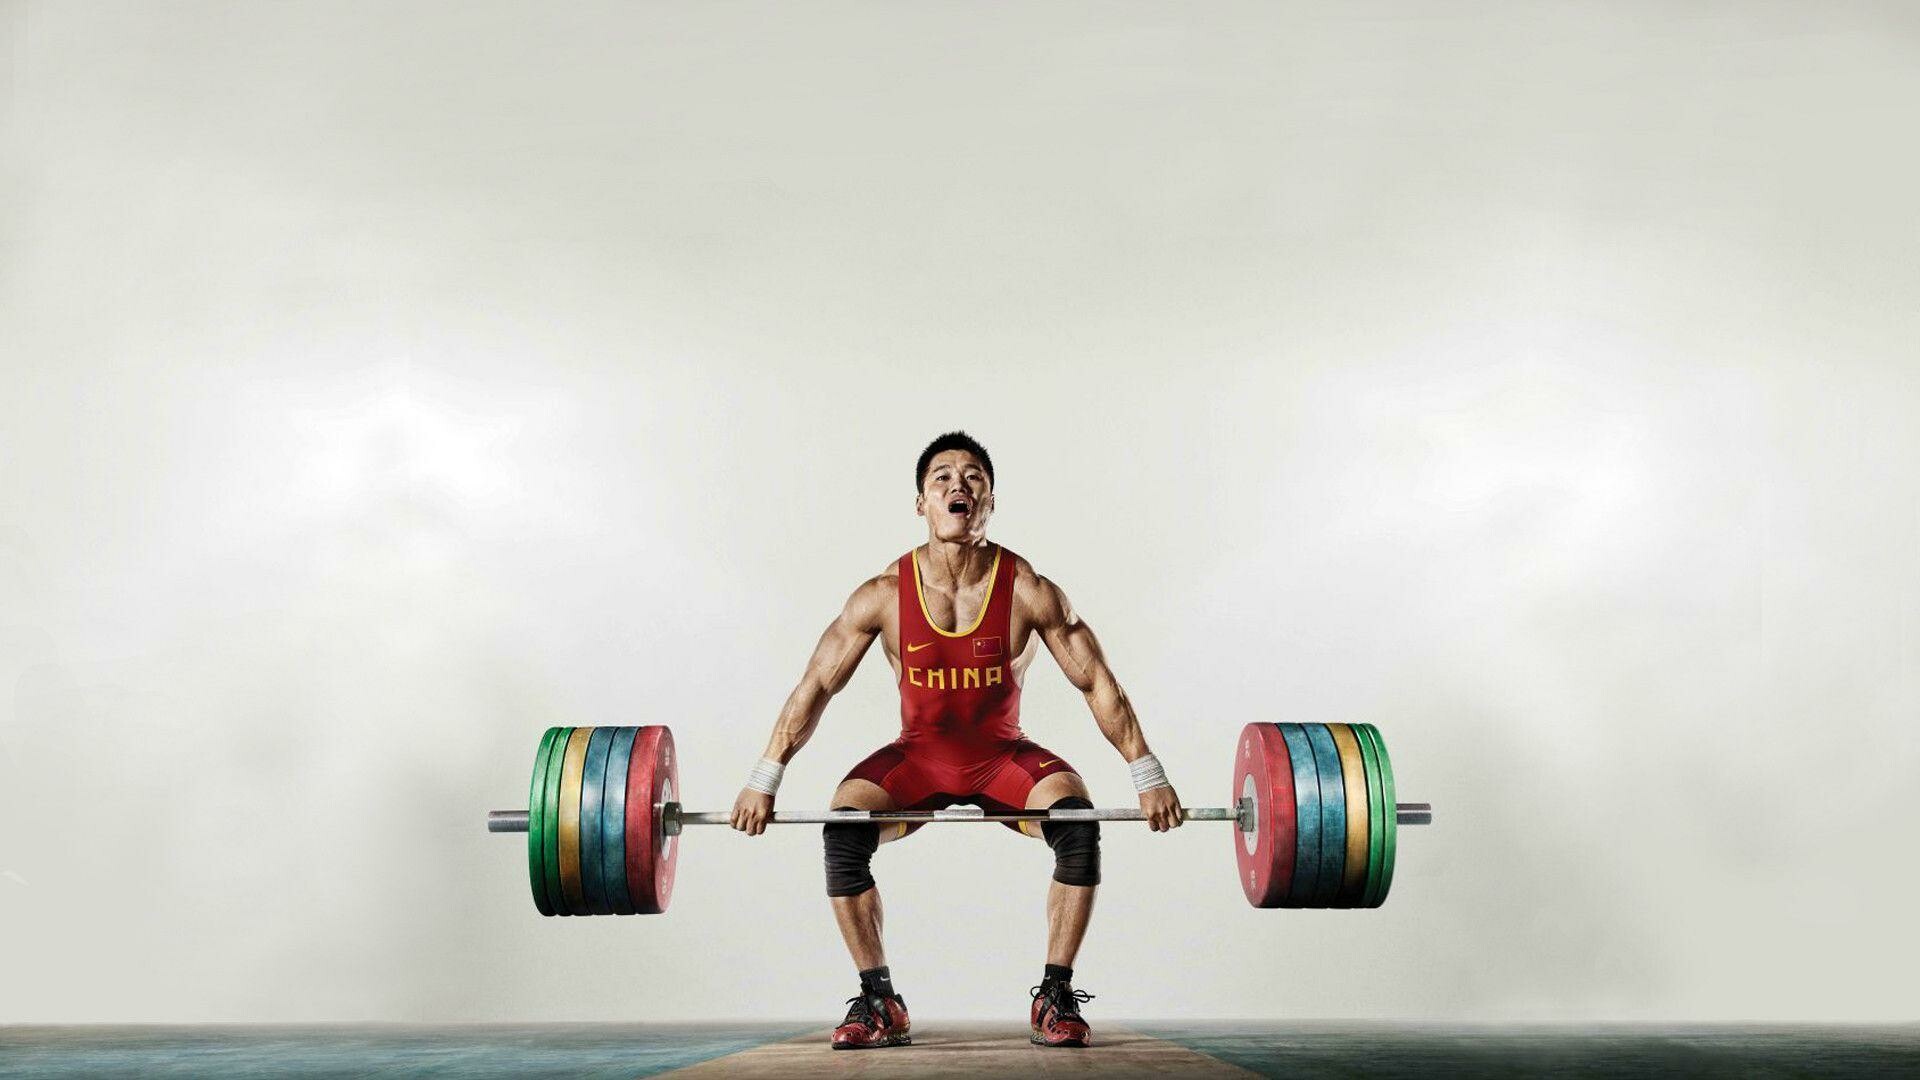 Powerlifting: Weightlifter, A sport in which athletes compete in lifting a barbell. 1920x1080 Full HD Wallpaper.